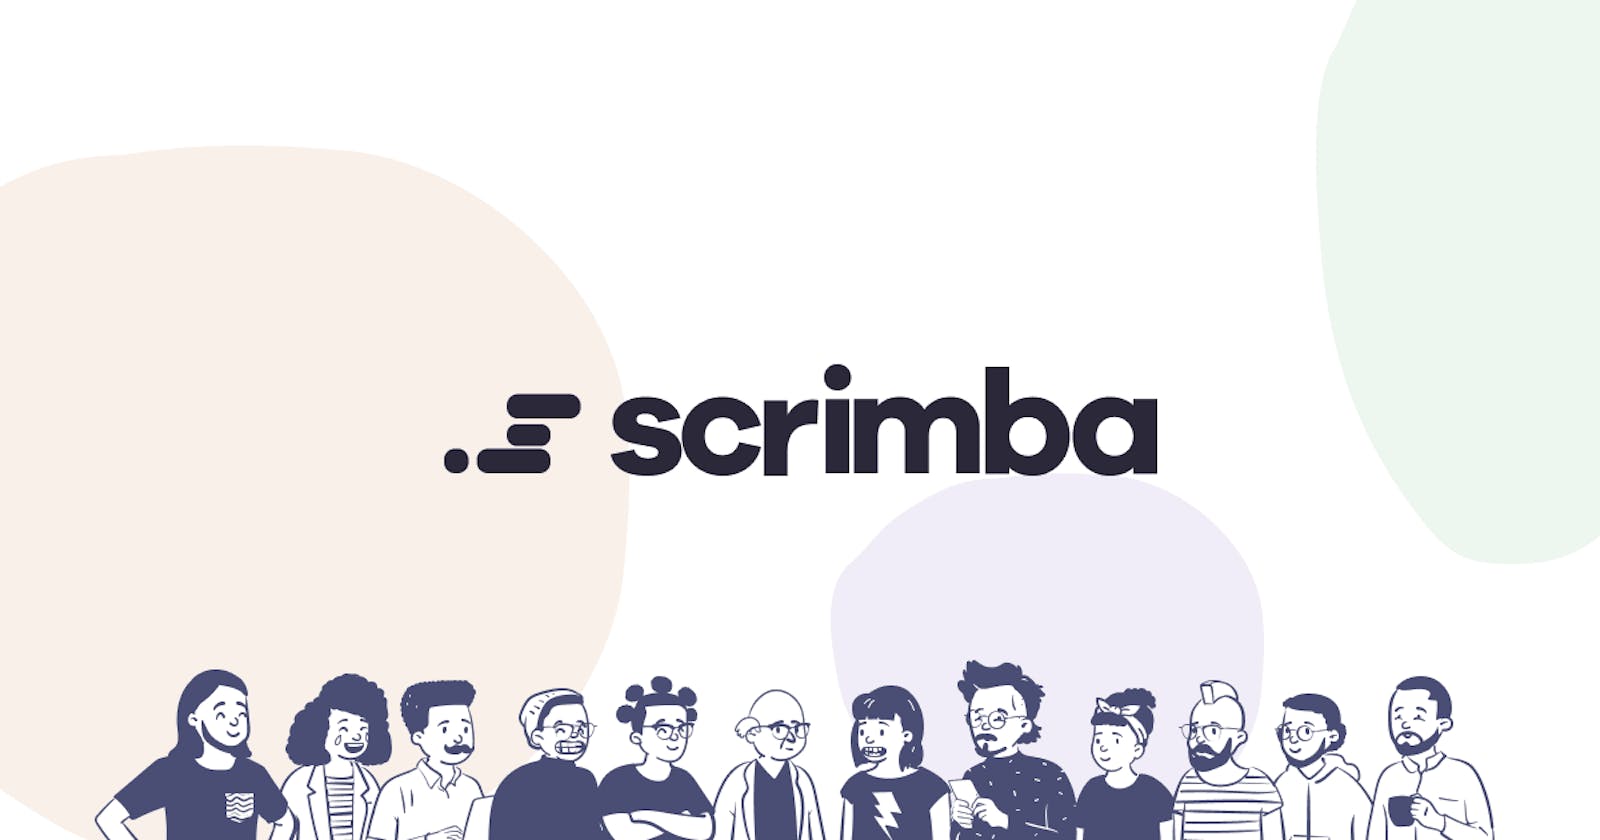 I did the "Learn Javascript" course with Scrimba